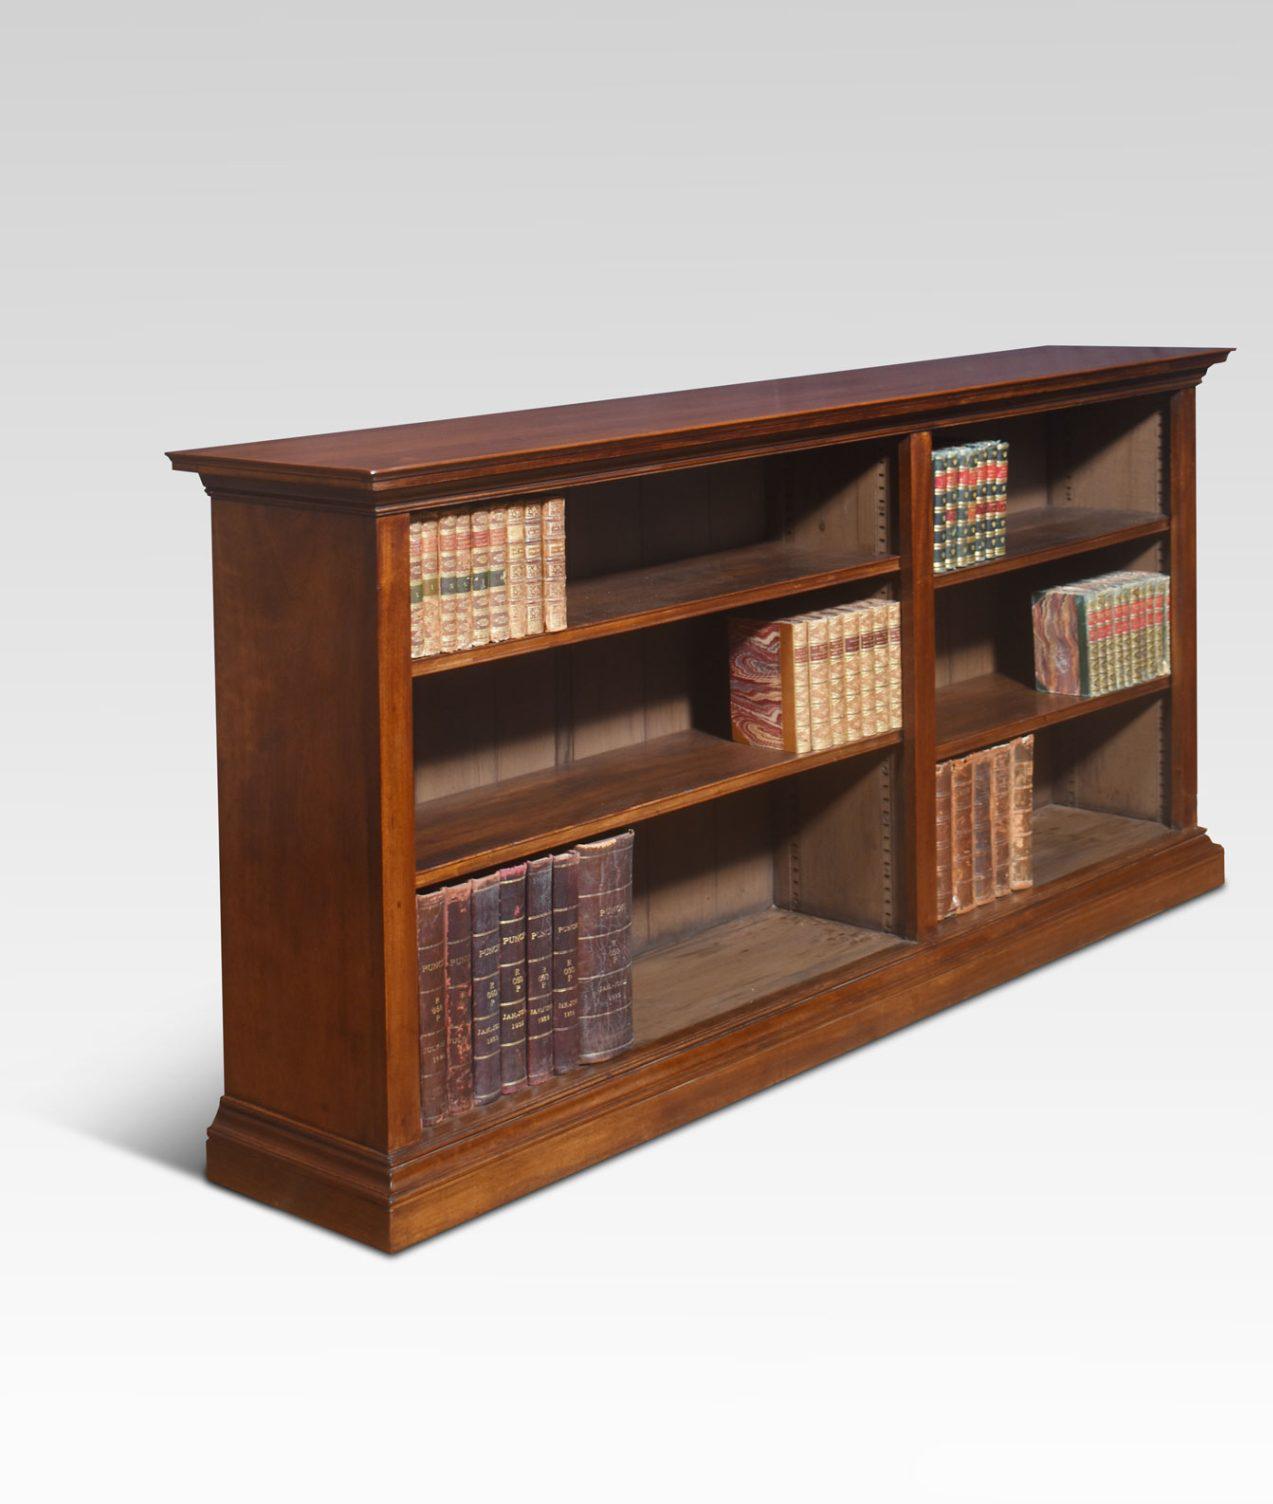  Walnut open bookcase, the large rectangular well-figured top. Above two bays of adjustable shelves divided by column. All are raised on a plinth base.
Dimensions
Height 36.5 Inches
Width 71.5 Inches
Depth 15 Inches